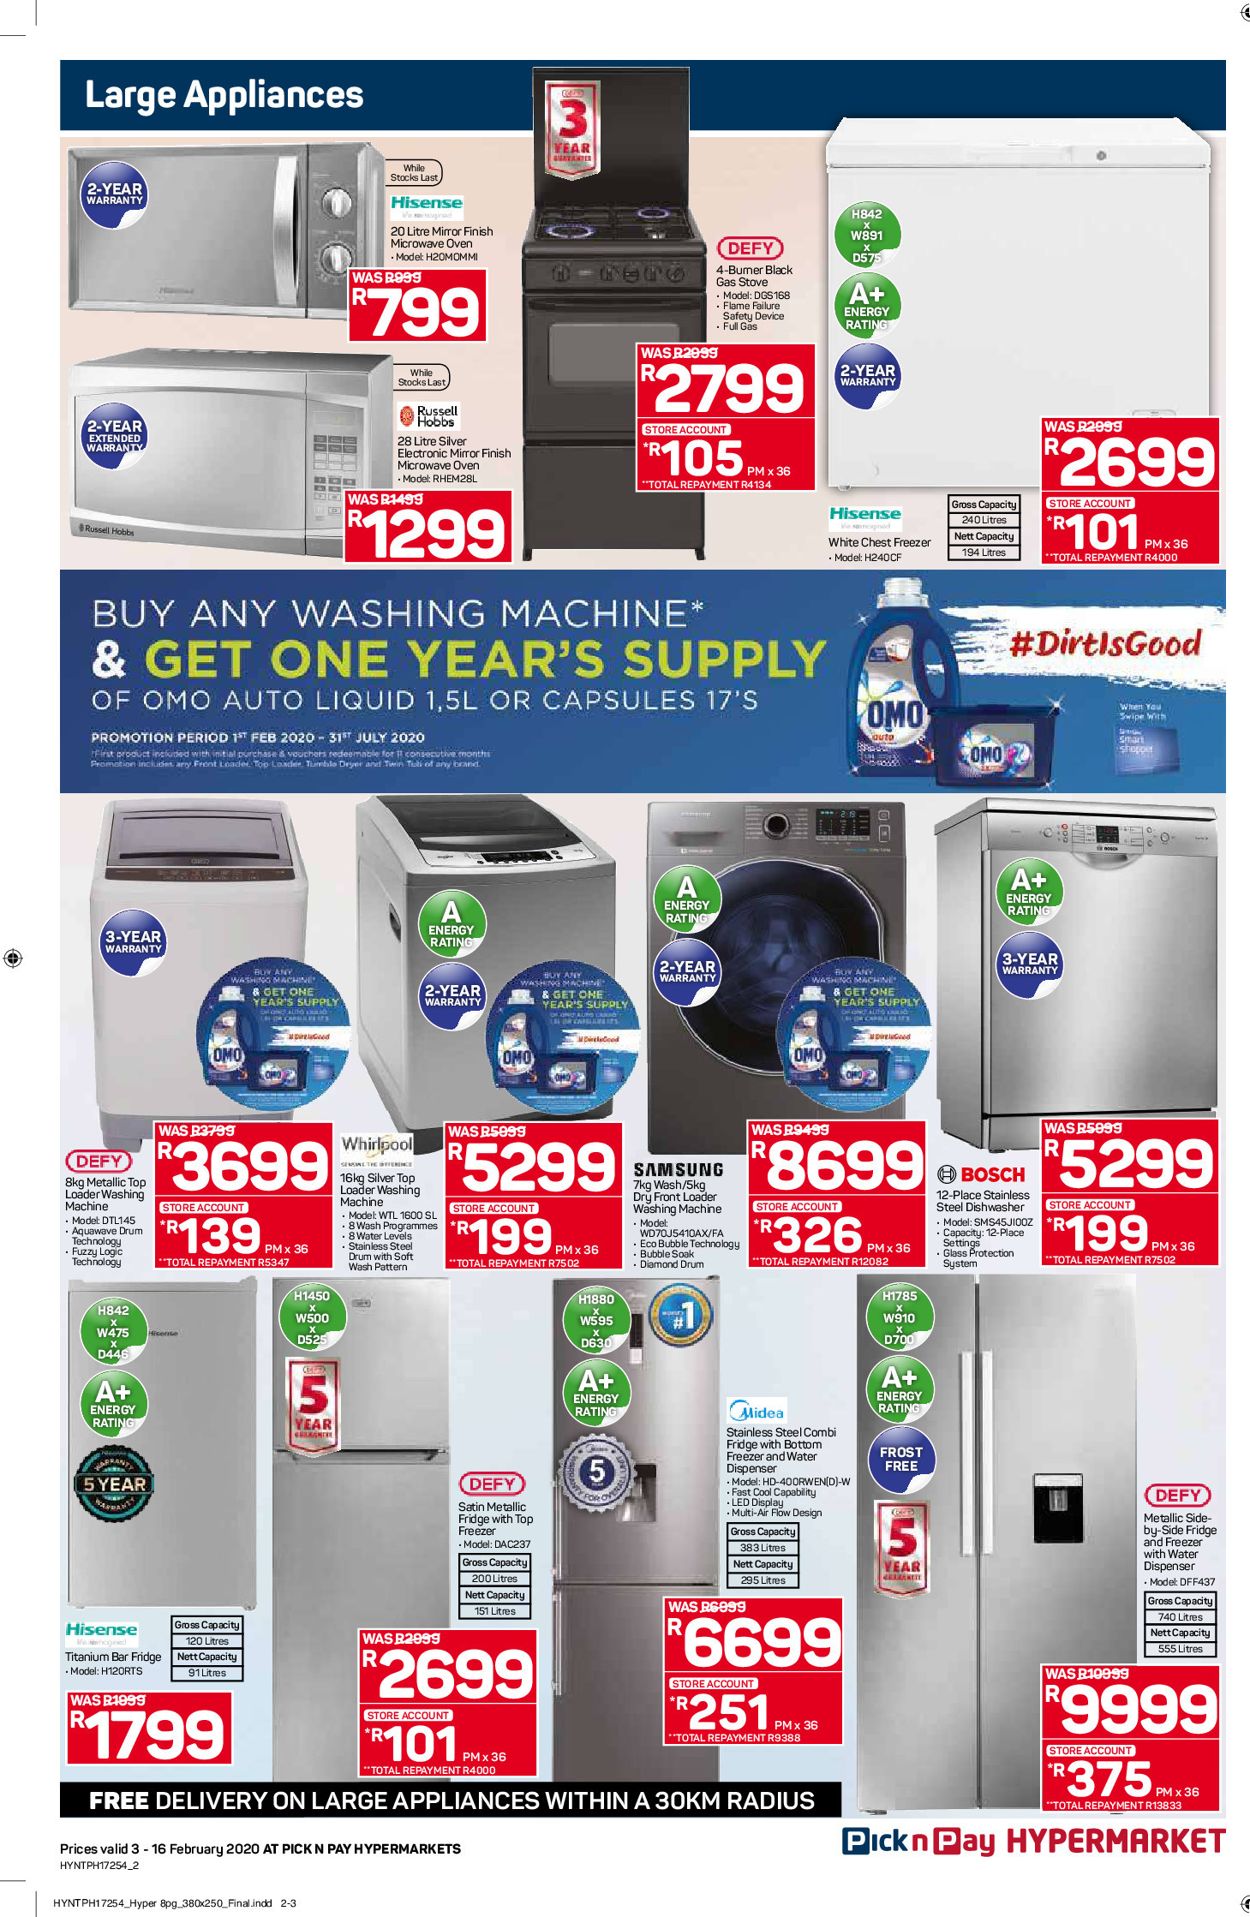 Pick n Pay Catalogue - 2020/02/03-2020/02/16 (Page 3)